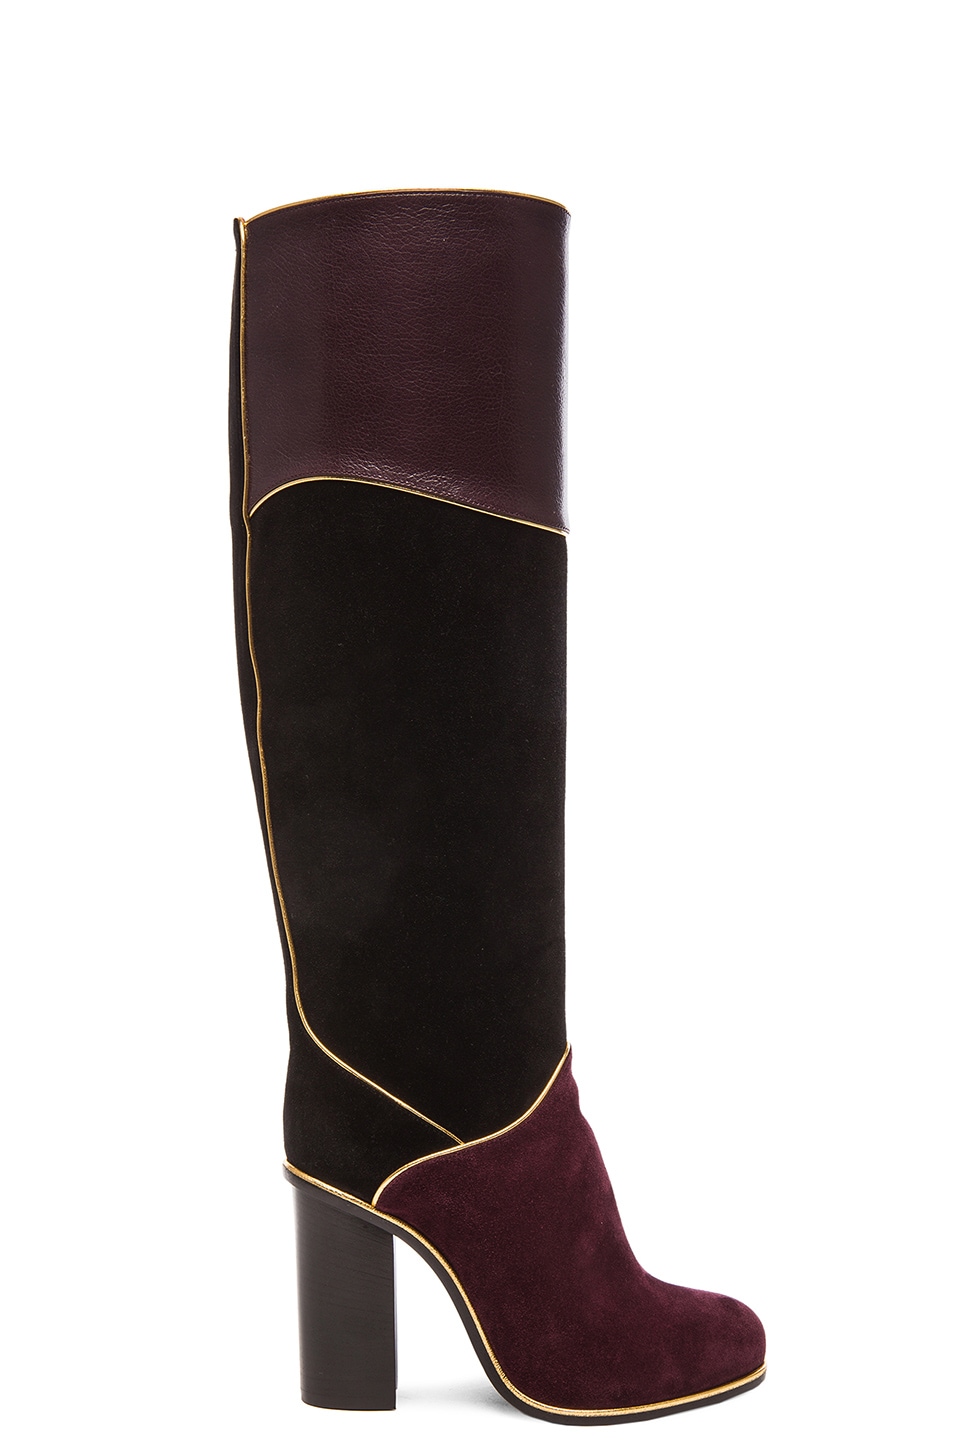 Image 1 of Lanvin Suede Calfskin Piping Boots in Black & Burgundy